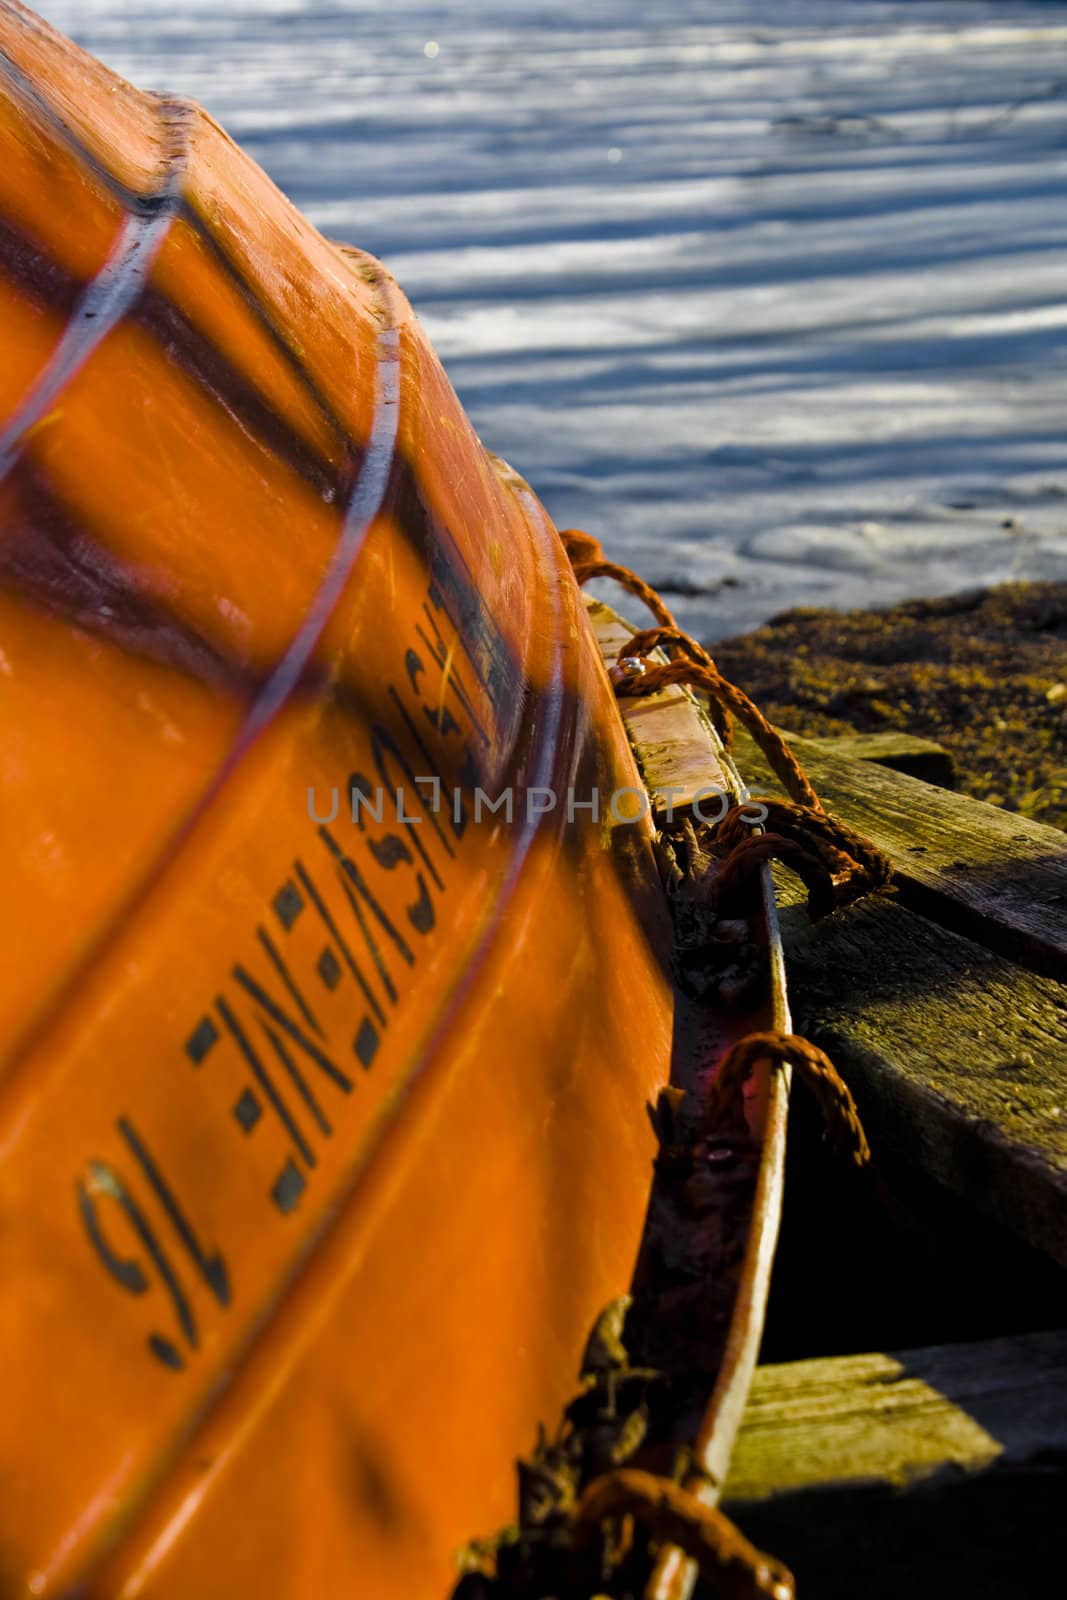 rowboat in orange in front of a sea